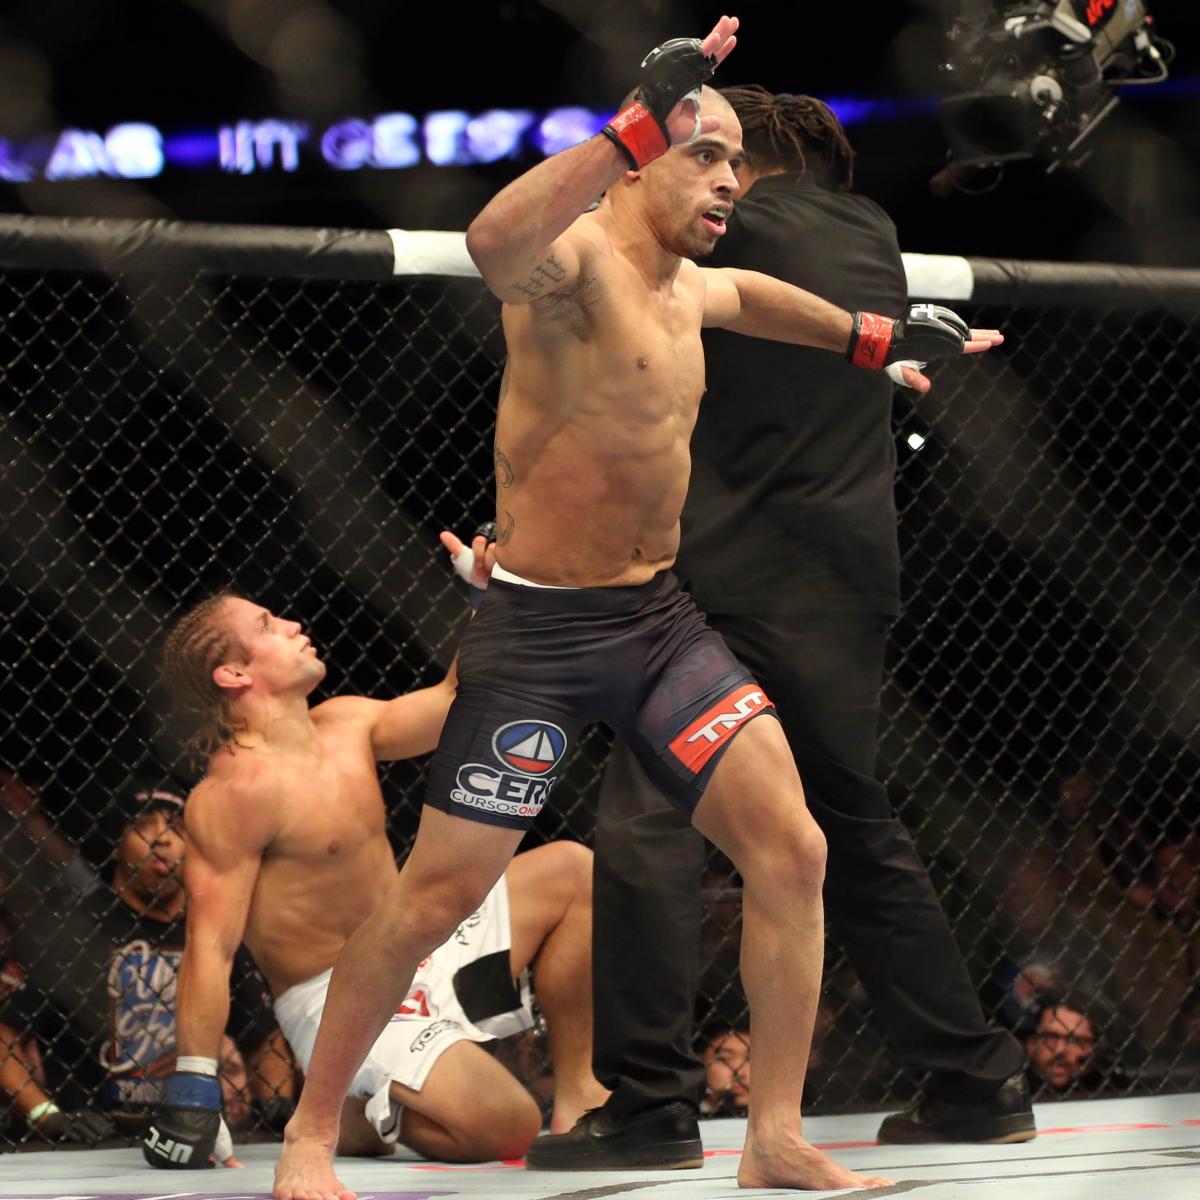 UFC 169 Video: Highlights from Renan Barao's Controversial TKO of Urijah Faber